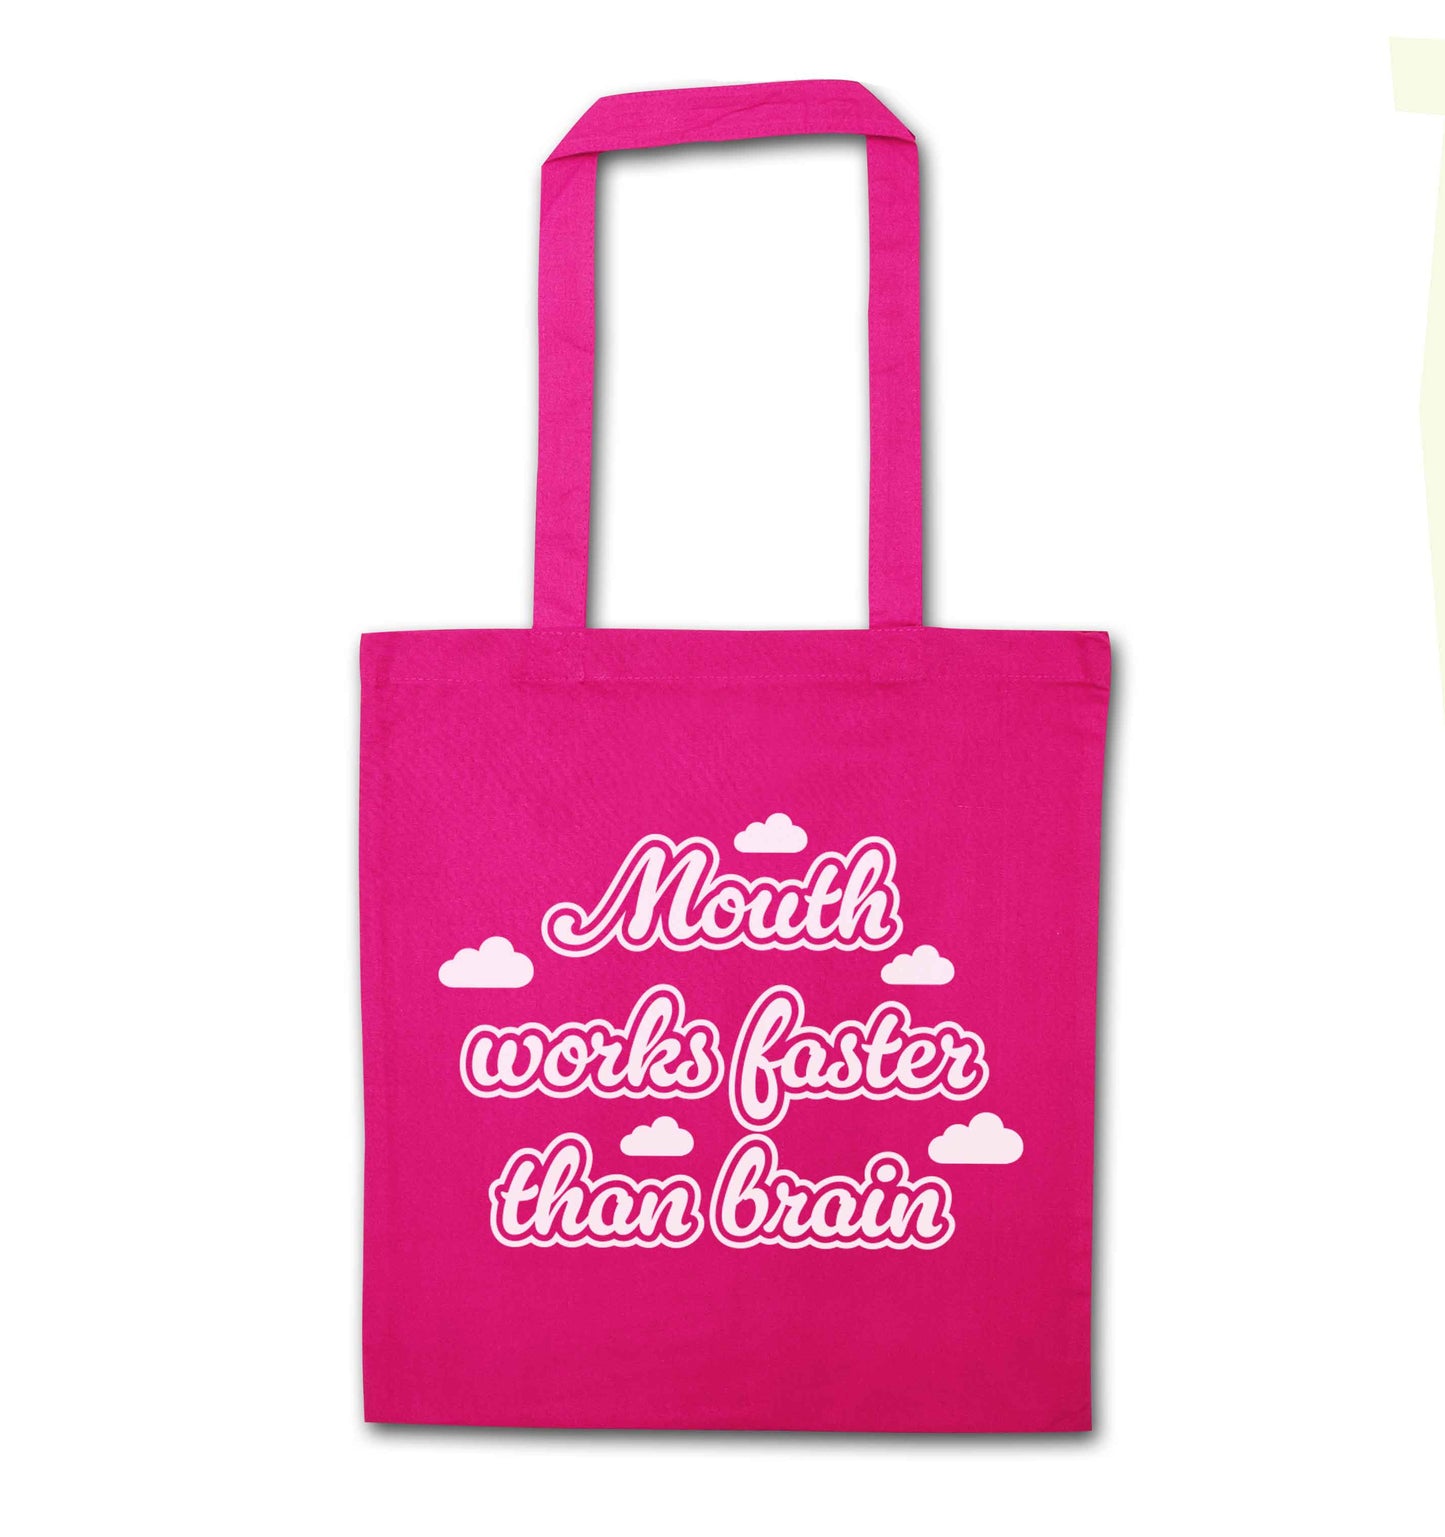 Mouth works faster than brain pink tote bag